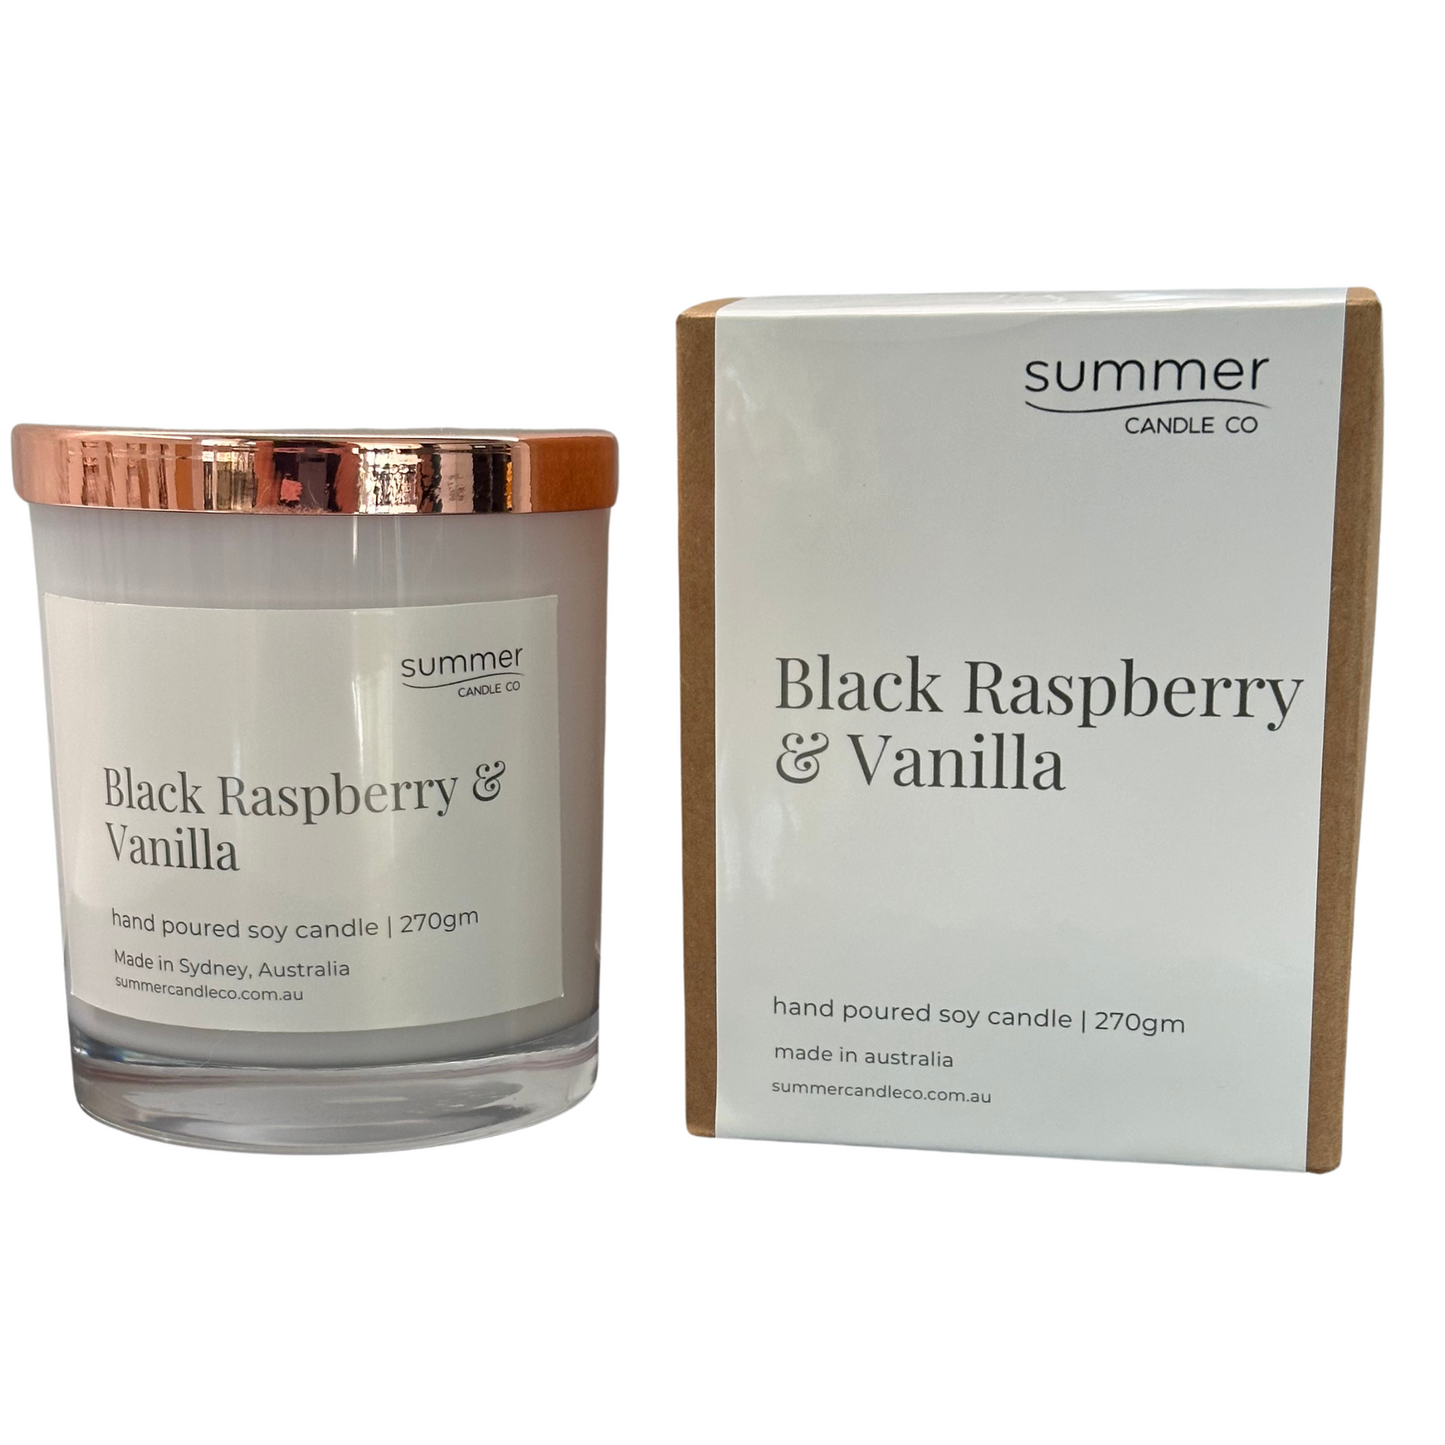 Lovely Hand Poured Soy Candle 270gram Fragrance of Black Raspberry & Vanilla and Gift Box